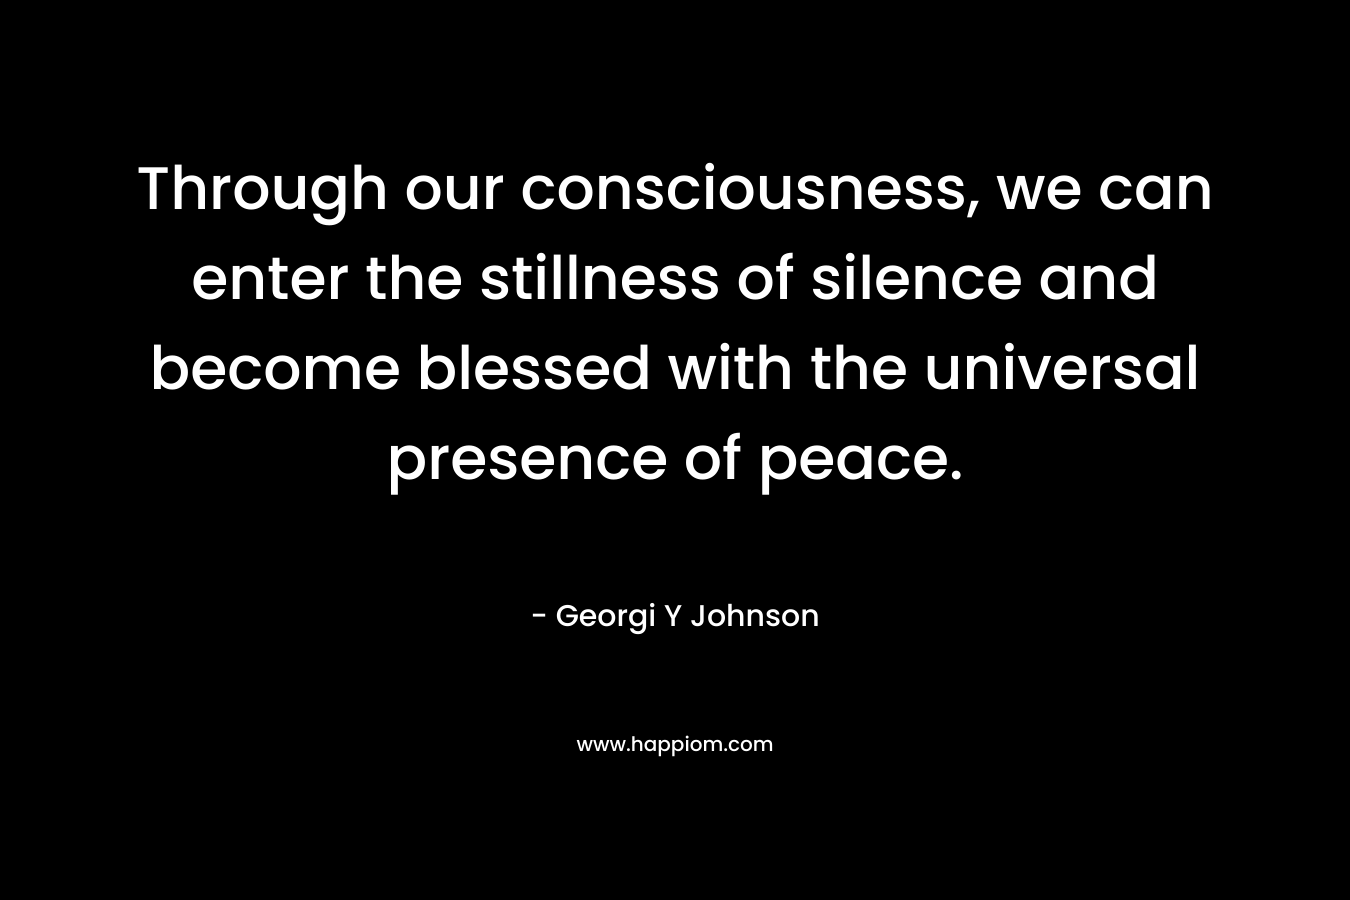 Through our consciousness, we can enter the stillness of silence and become blessed with the universal presence of peace.